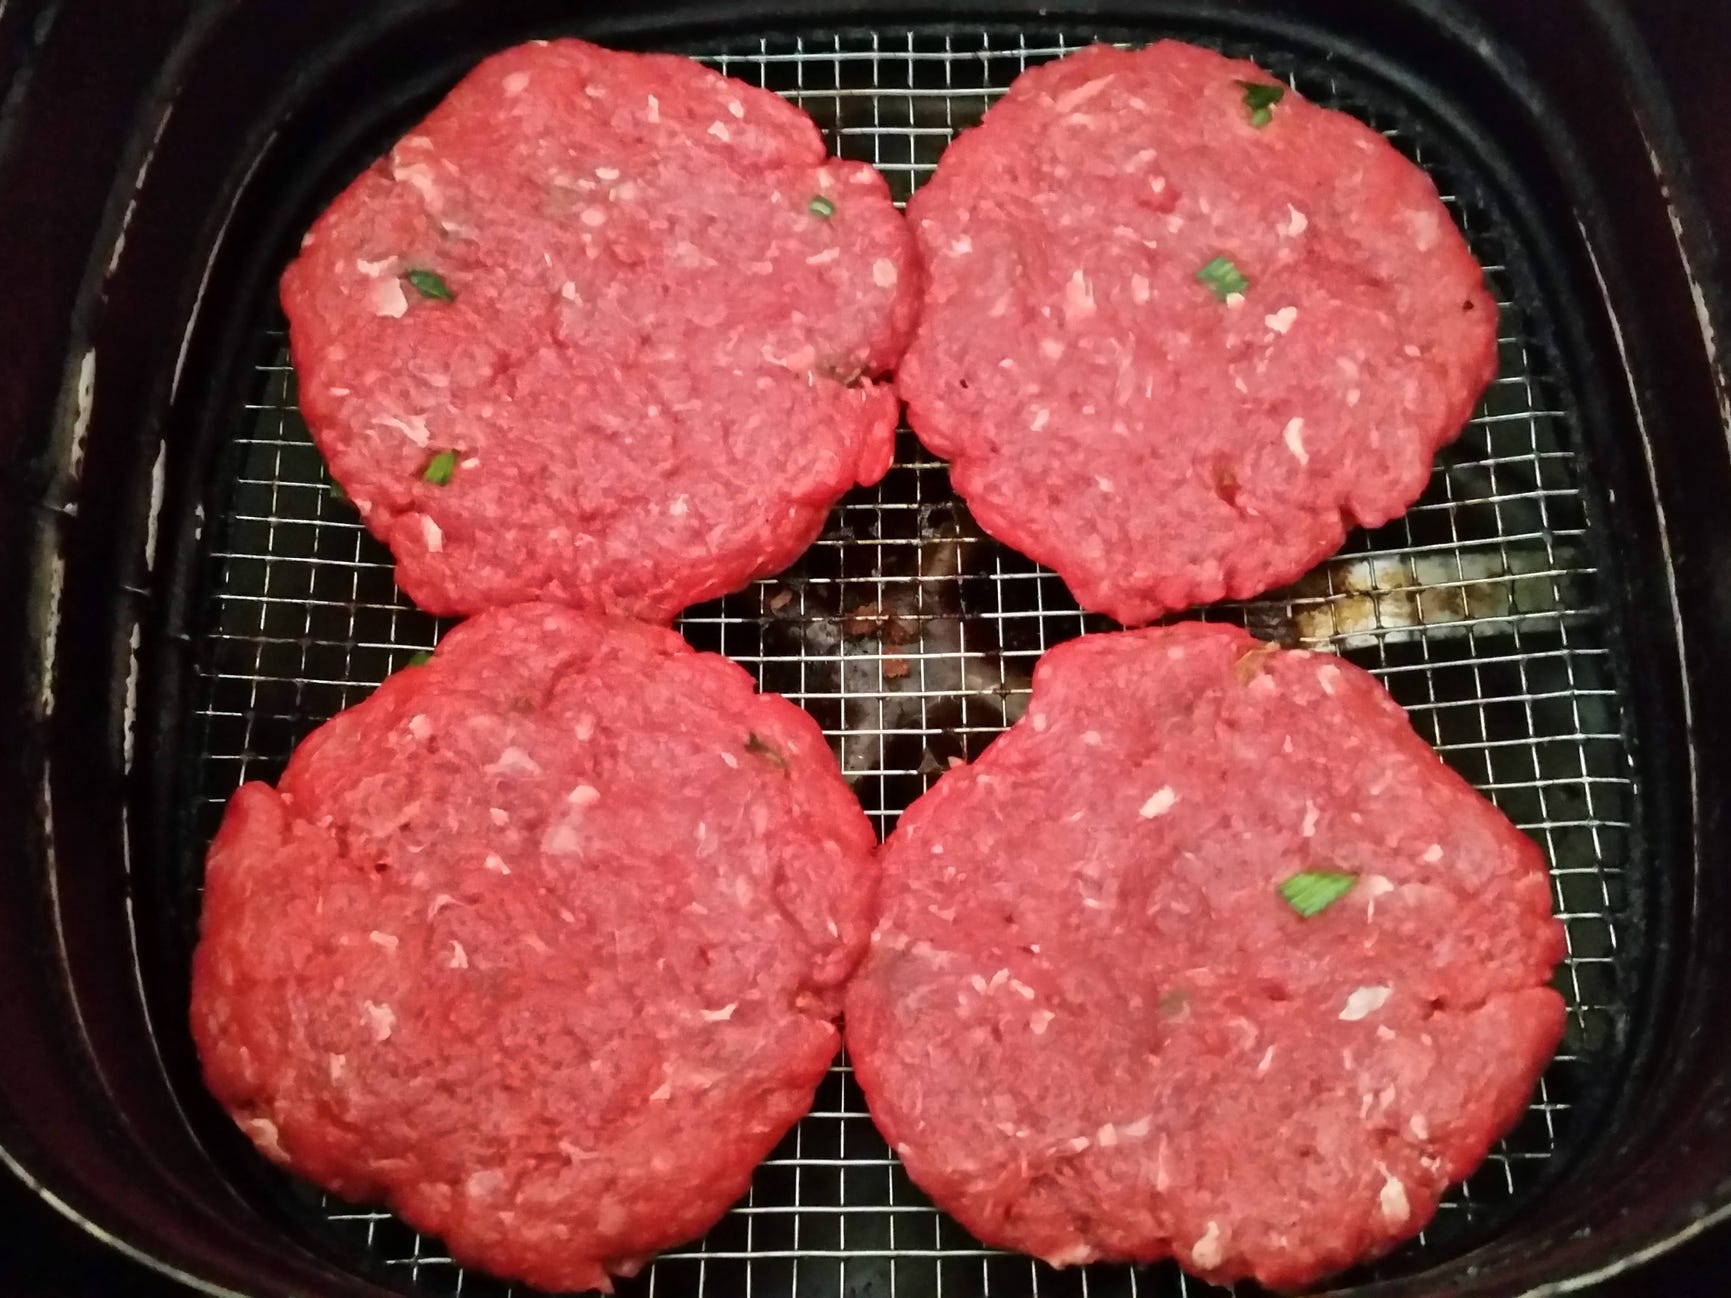 Four raw hamburger patties in the basket of an air fryer